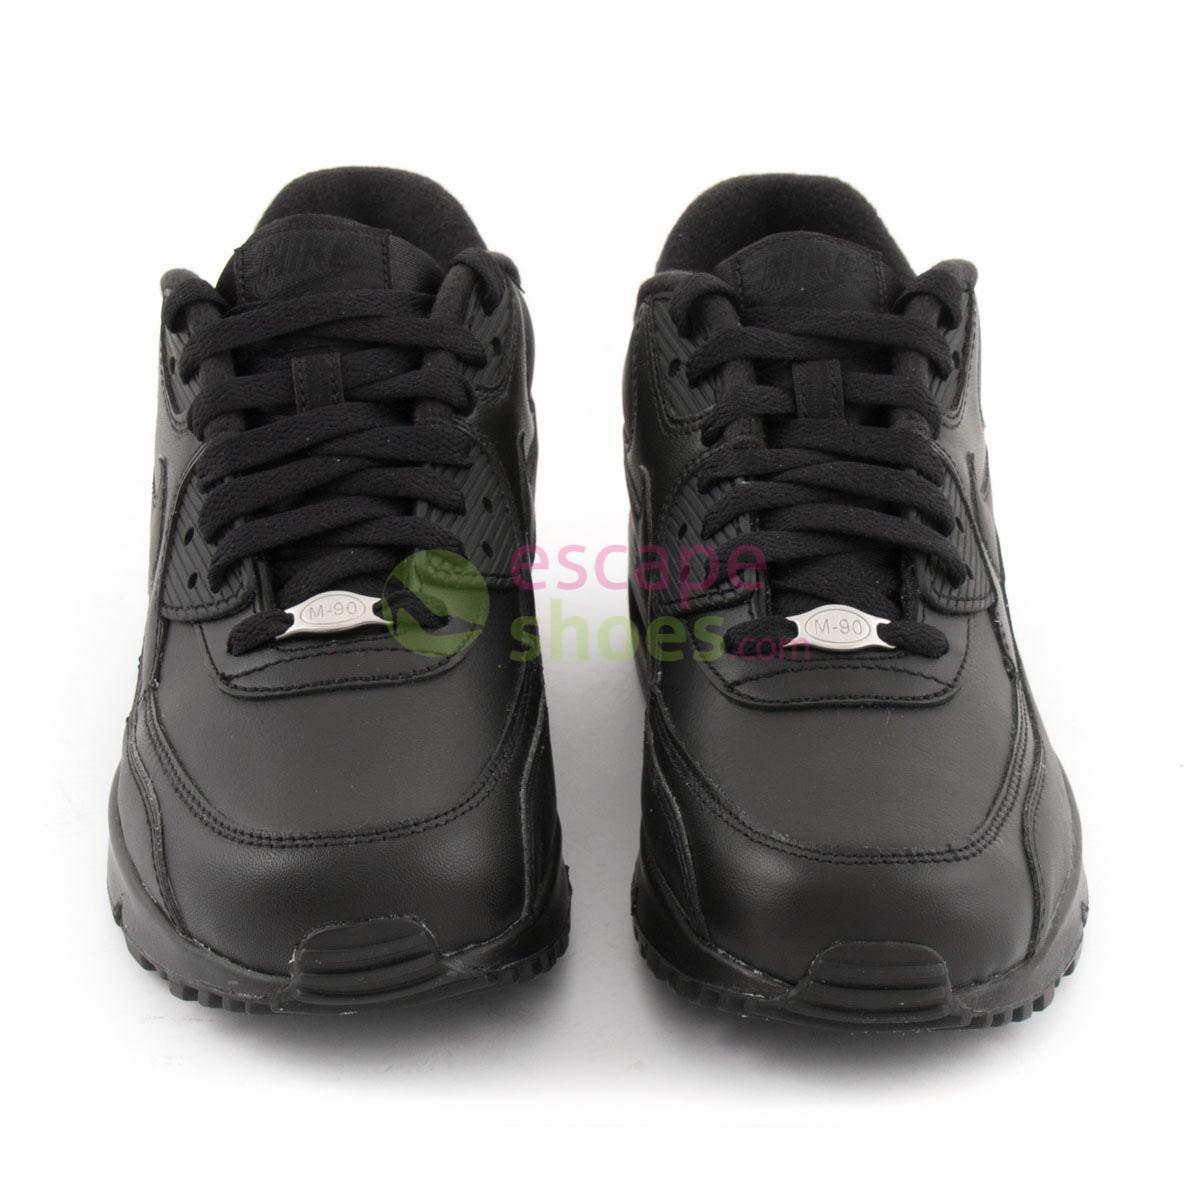 Sneakers NIKE Air Max 90 Leather Black 302519 001